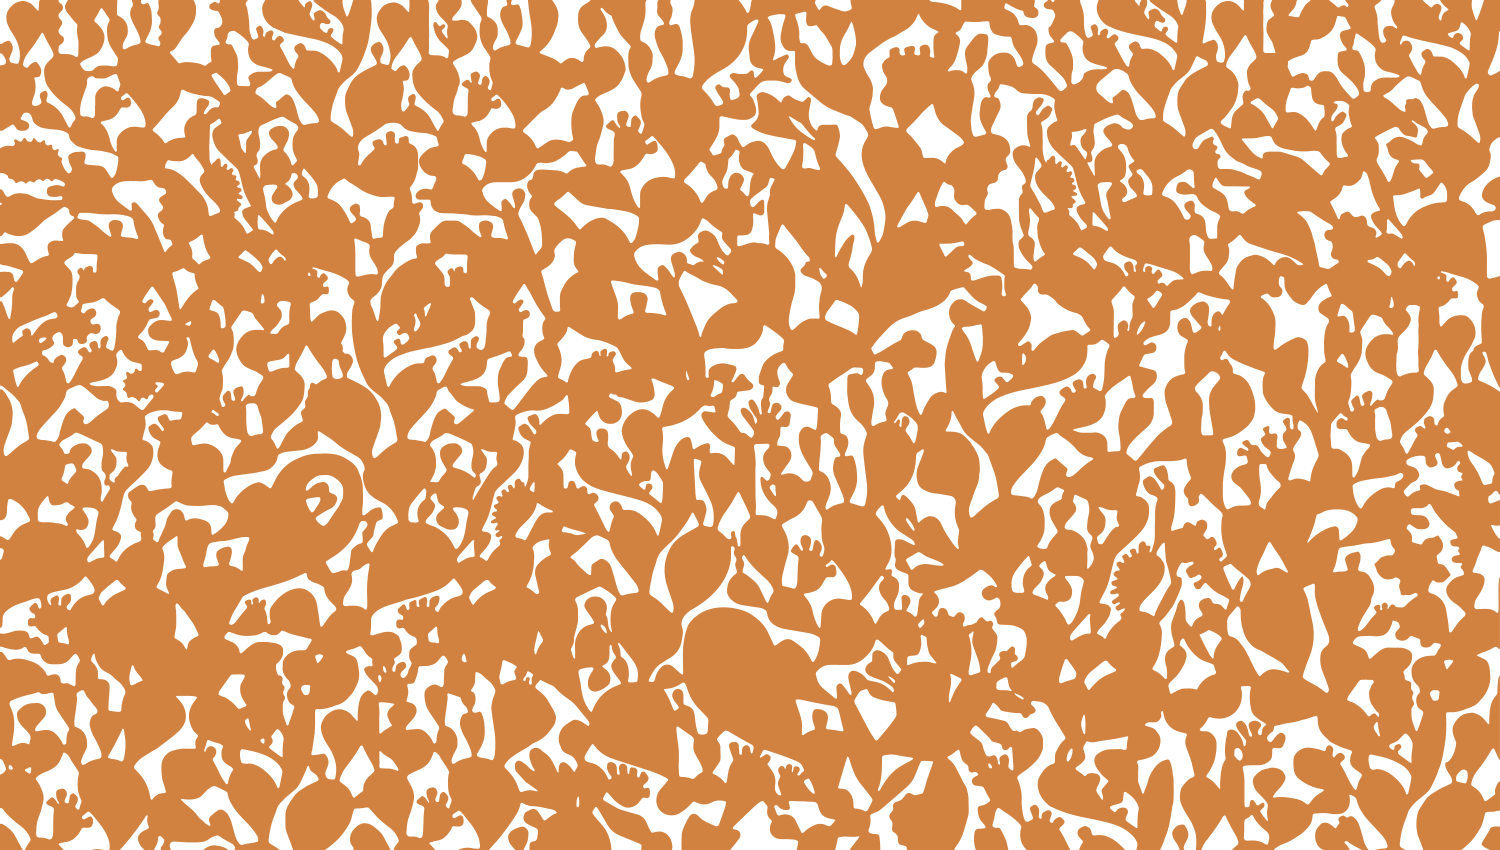 Parasoleil™ Anderson Ranch© pattern displayed with a ochre color overlay